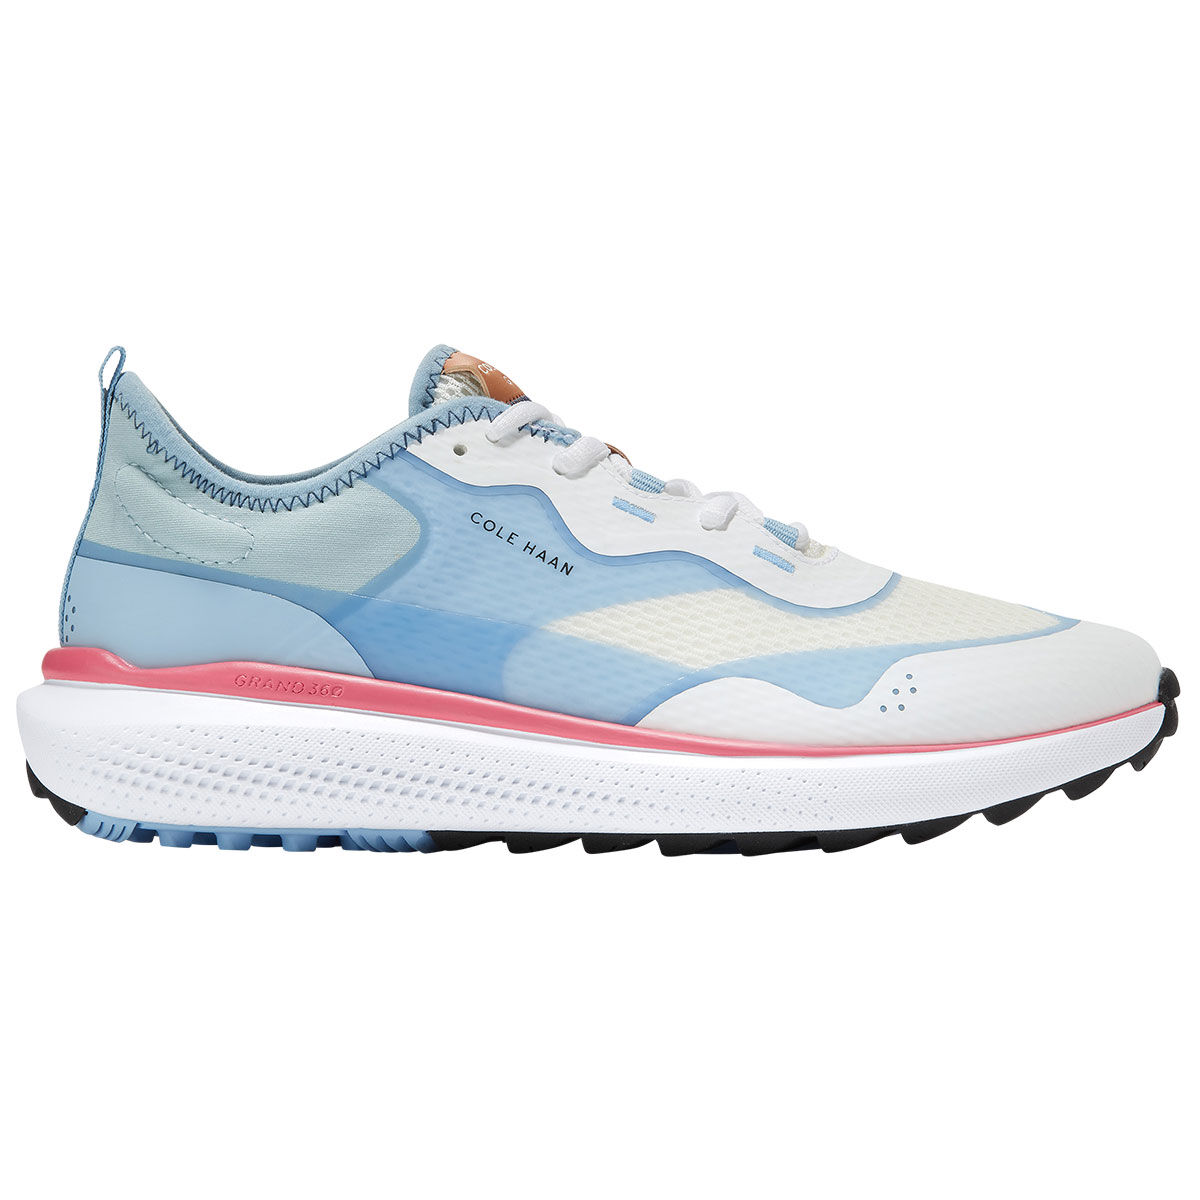 Cole Haan Womens ZG Golf Fairway Spikeless Golf Shoes, Female, White/blue/coral, 4 | American Golf